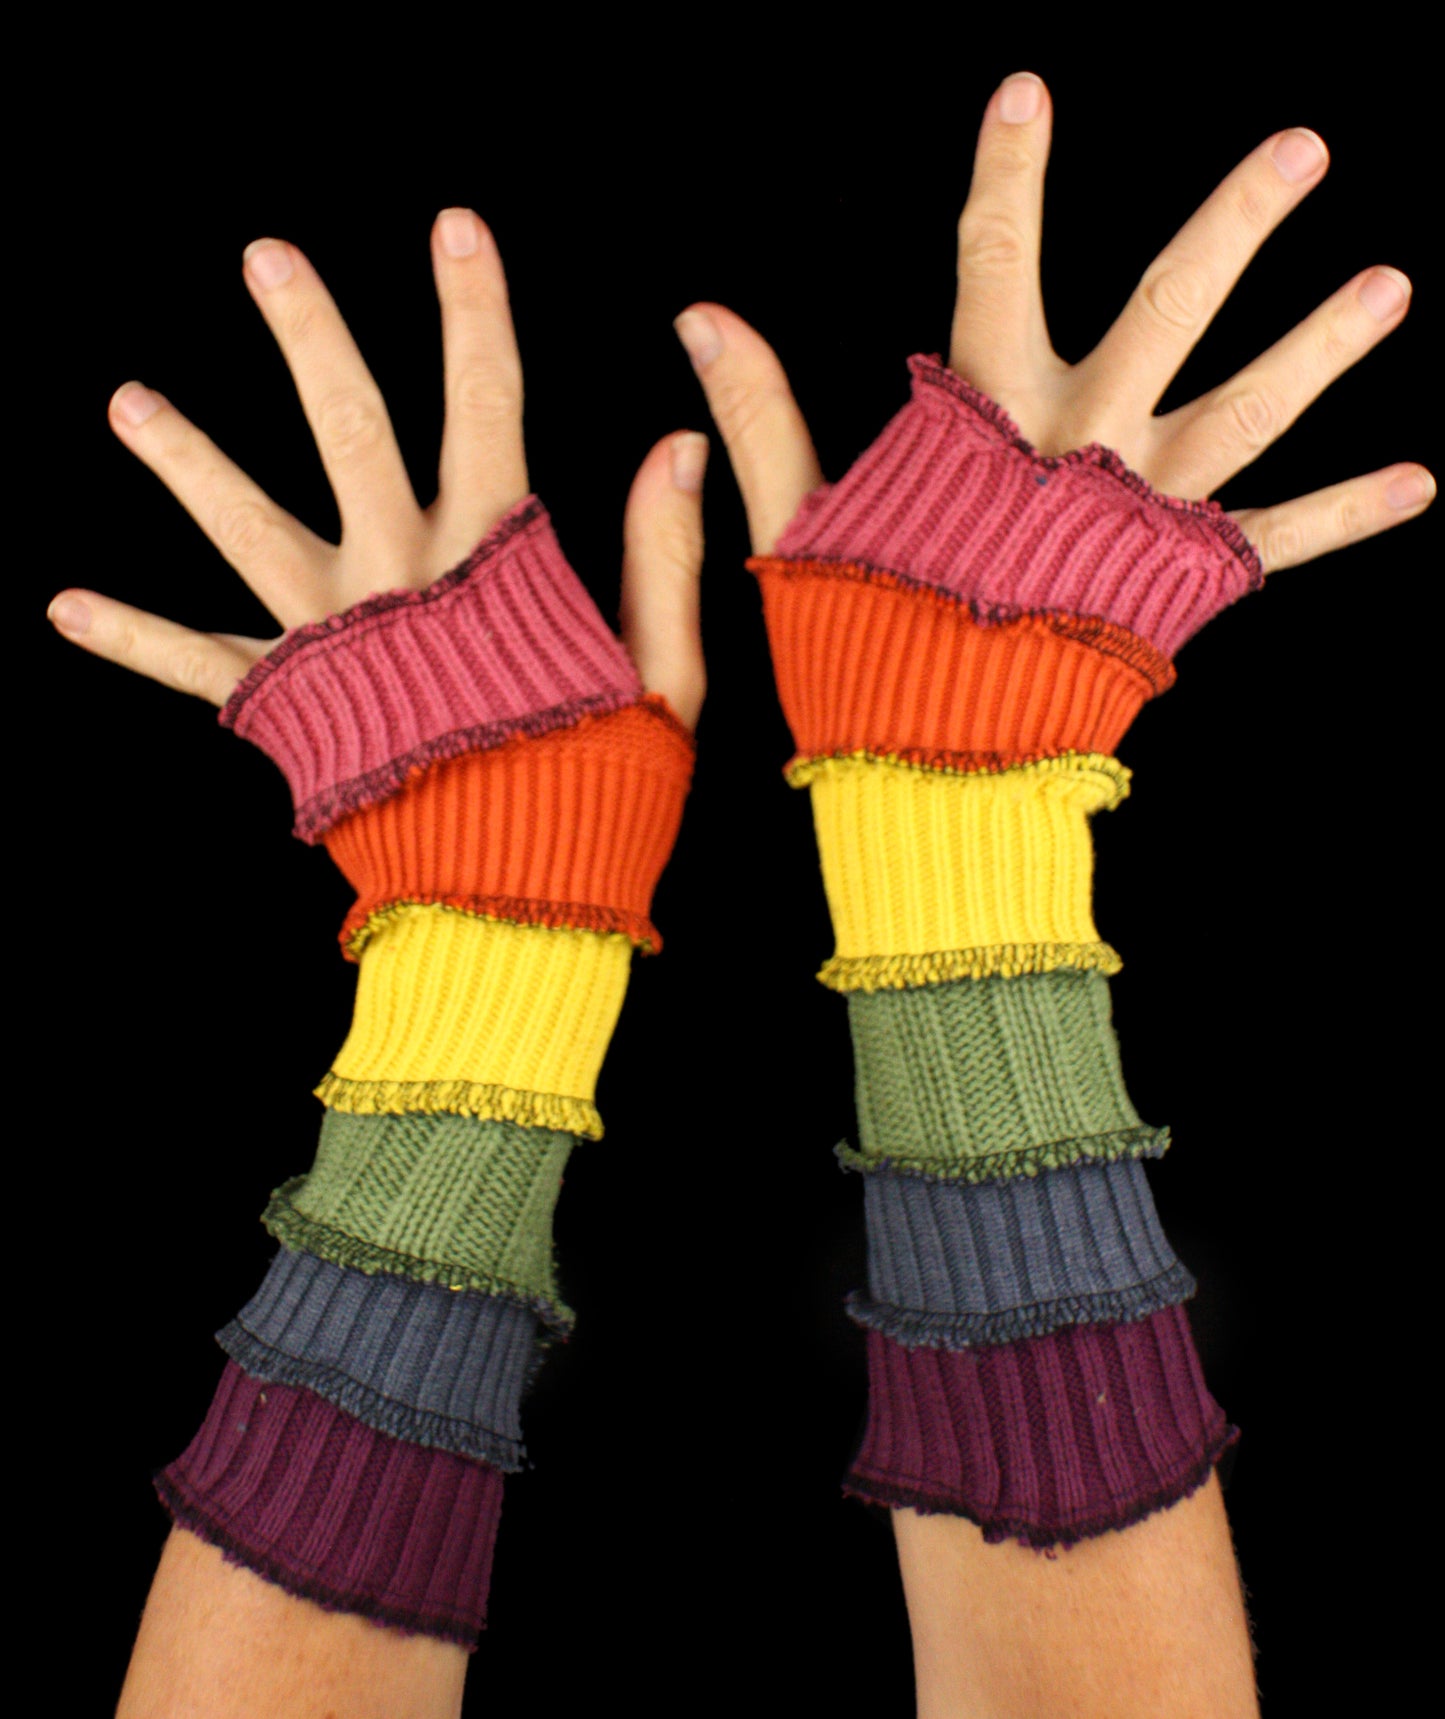 Arm Warmers - WOOL-FREE - made from upcycled sweaters